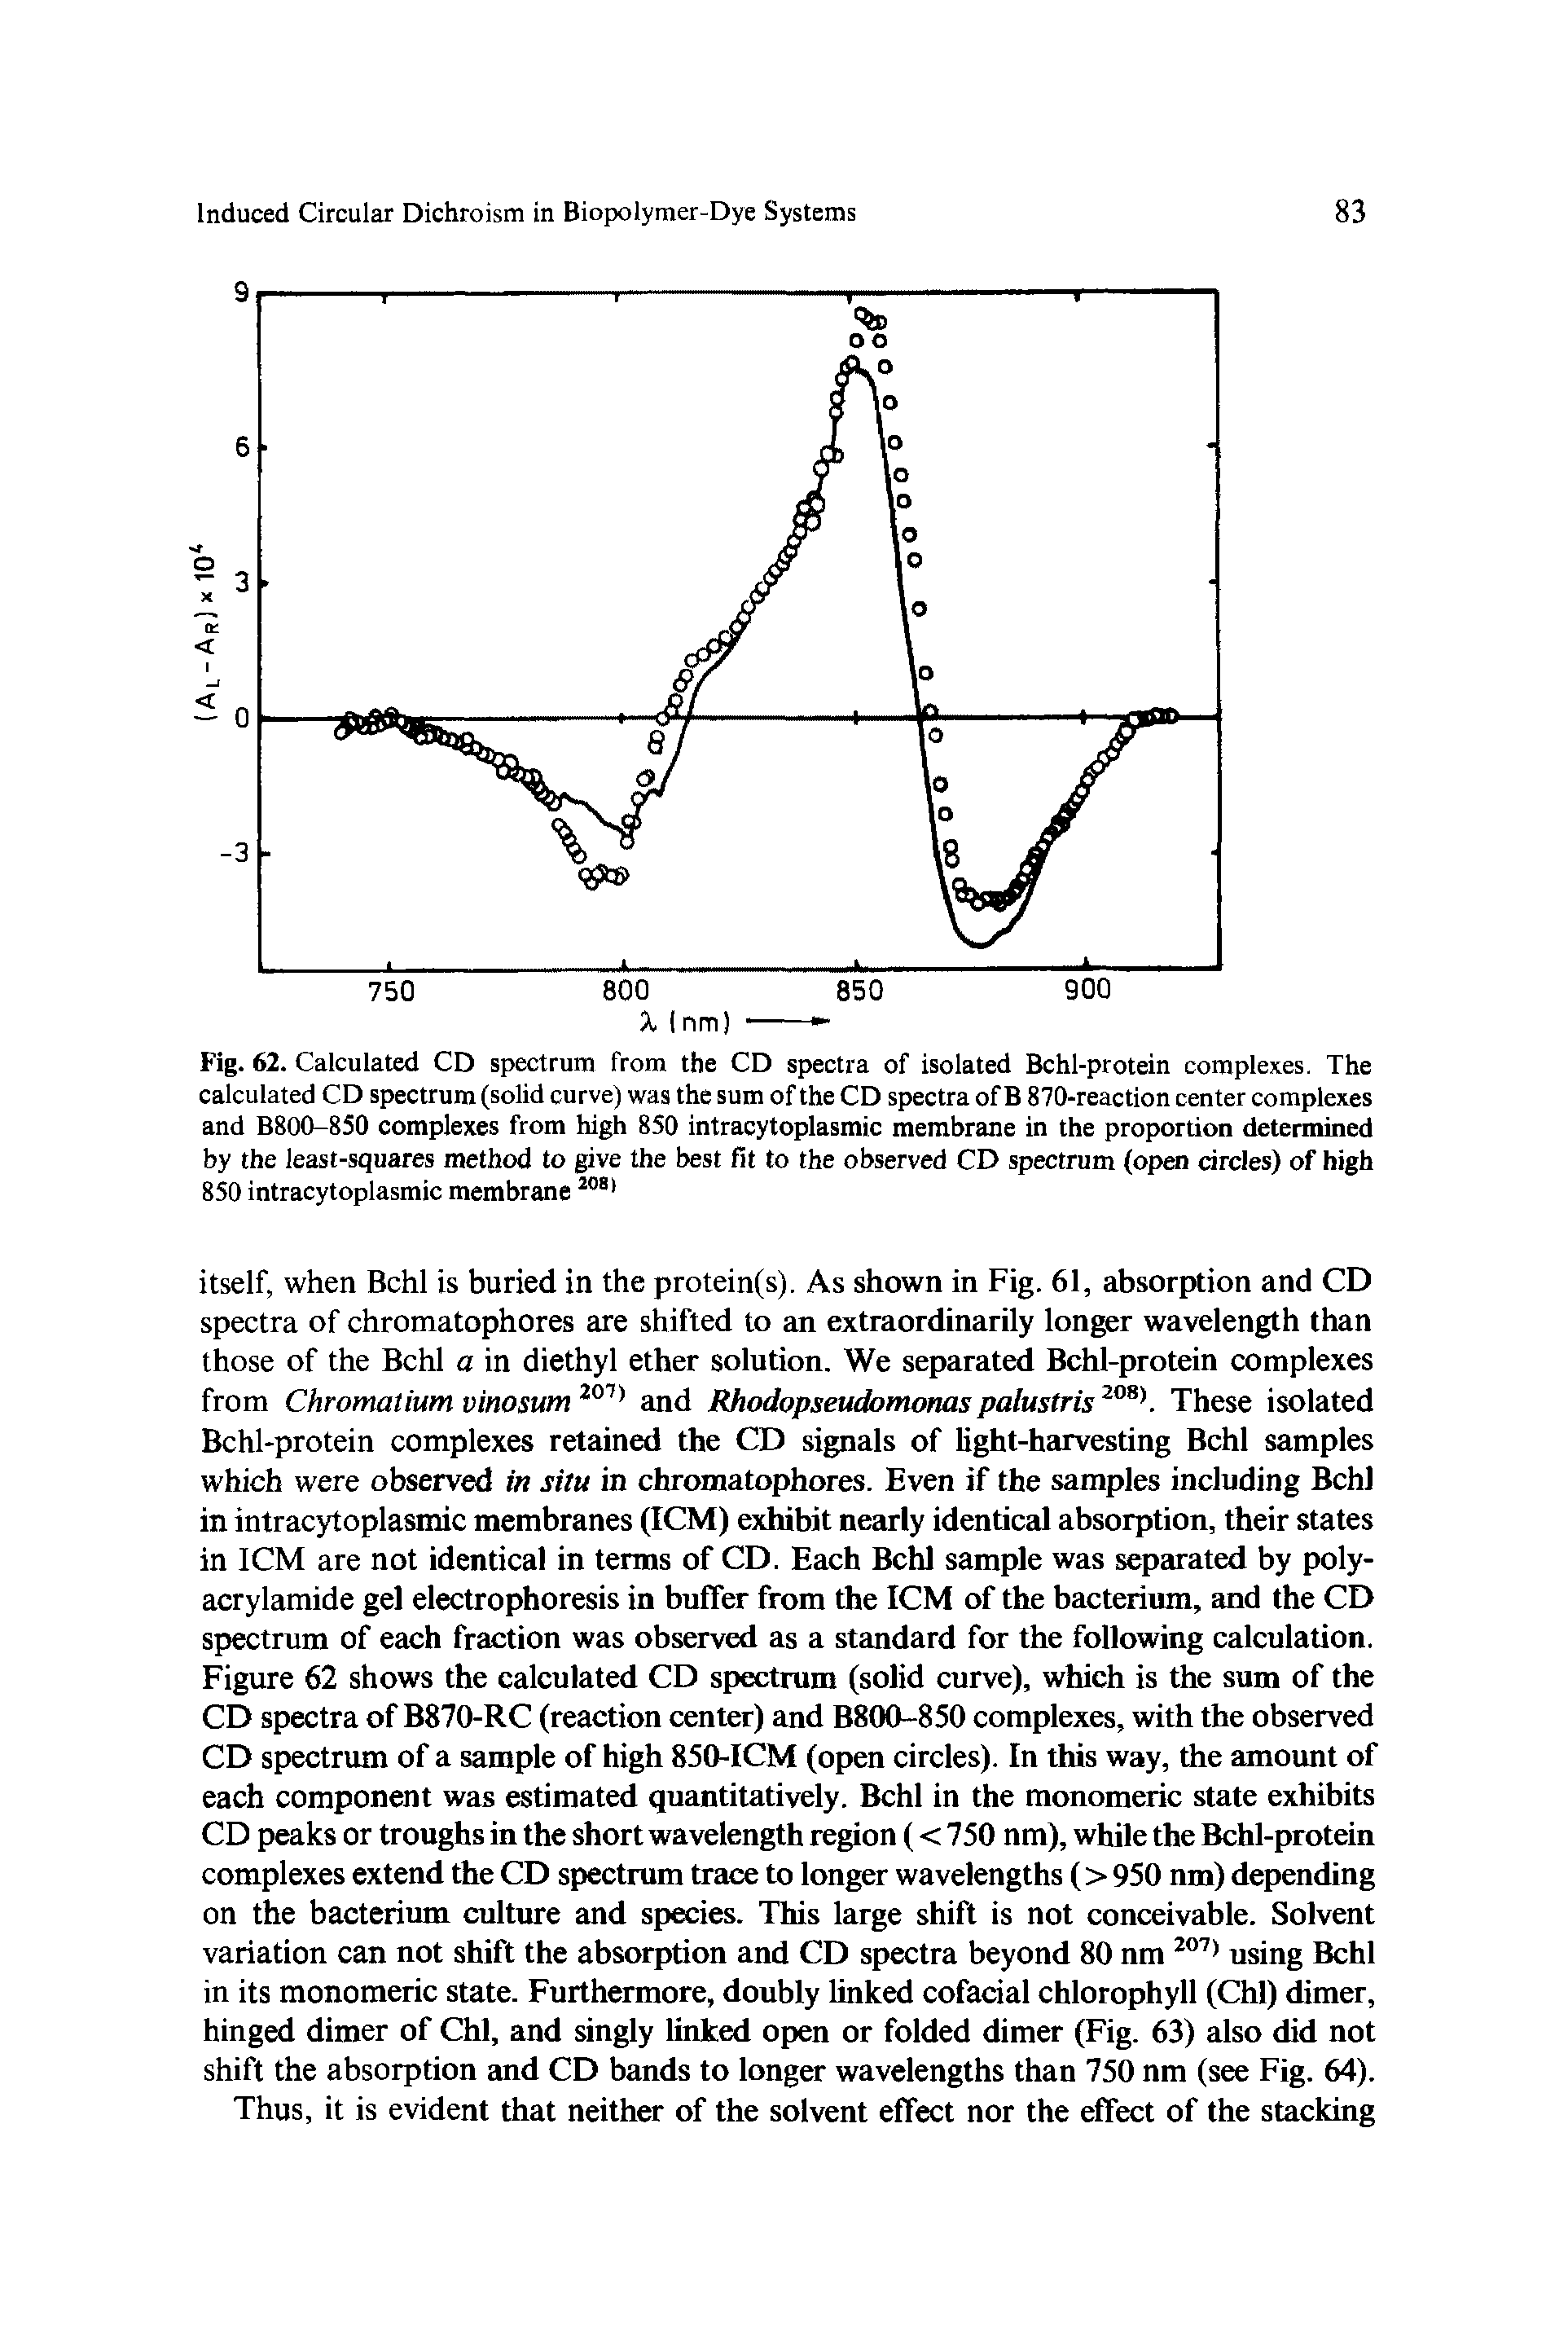 Fig. 62. Calculated CD spectrum from the CD spectra of isolated Bchl-protein complexes. The calculated CD spectrum (solid curve) was the sum of the CD spectra of B 870-reaction center complexes and B800-850 complexes from high 850 intracytoplasmic membrane in the proportion determined by the least-squares method to give the best fit to the observed CD spectrum (open circles) of high 850 intracytoplasmic membrane 2081...